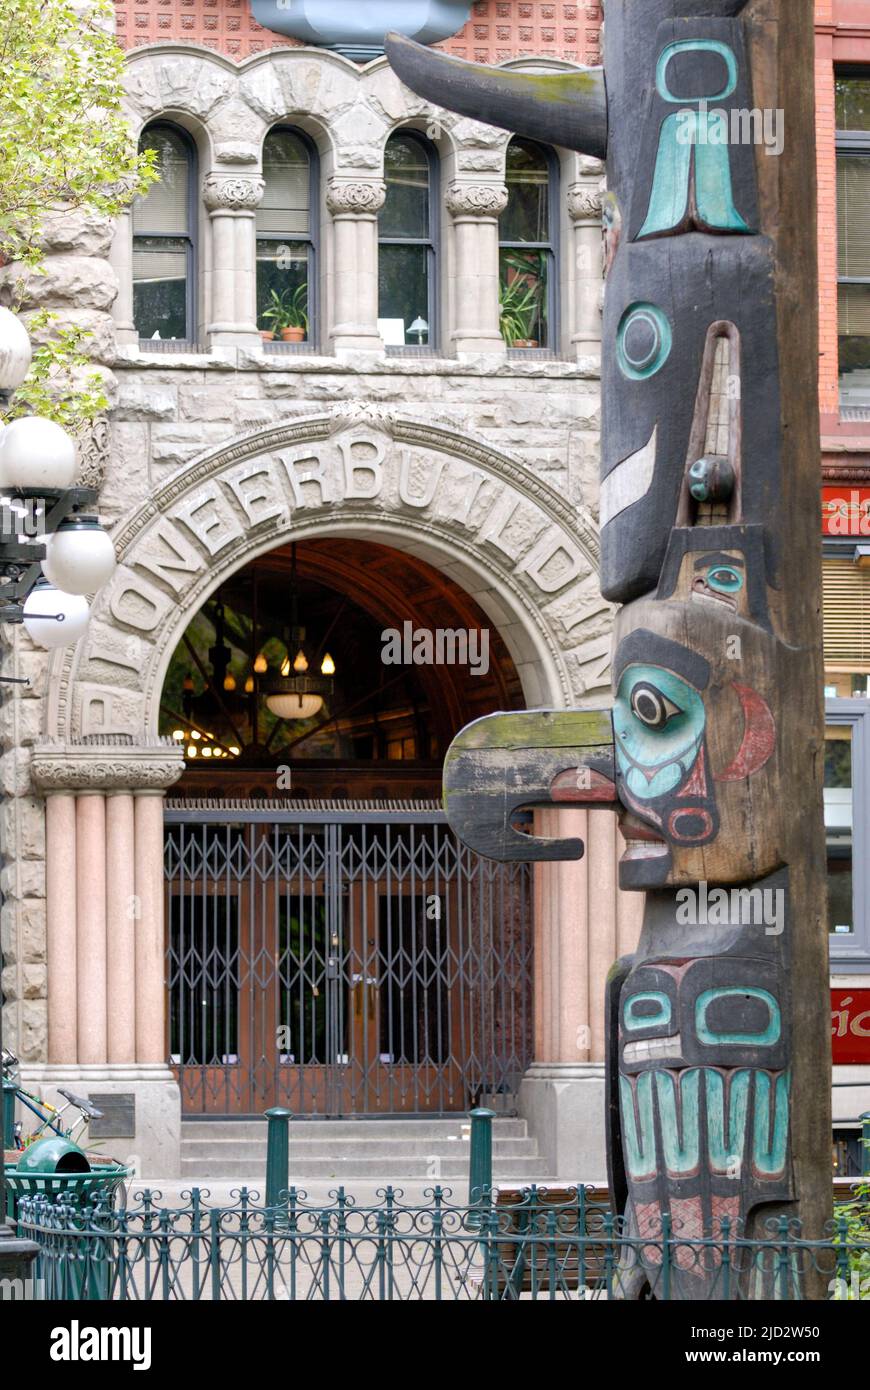 Totem pole and historic building at Seattle's Pioneer Square. Stock Photo